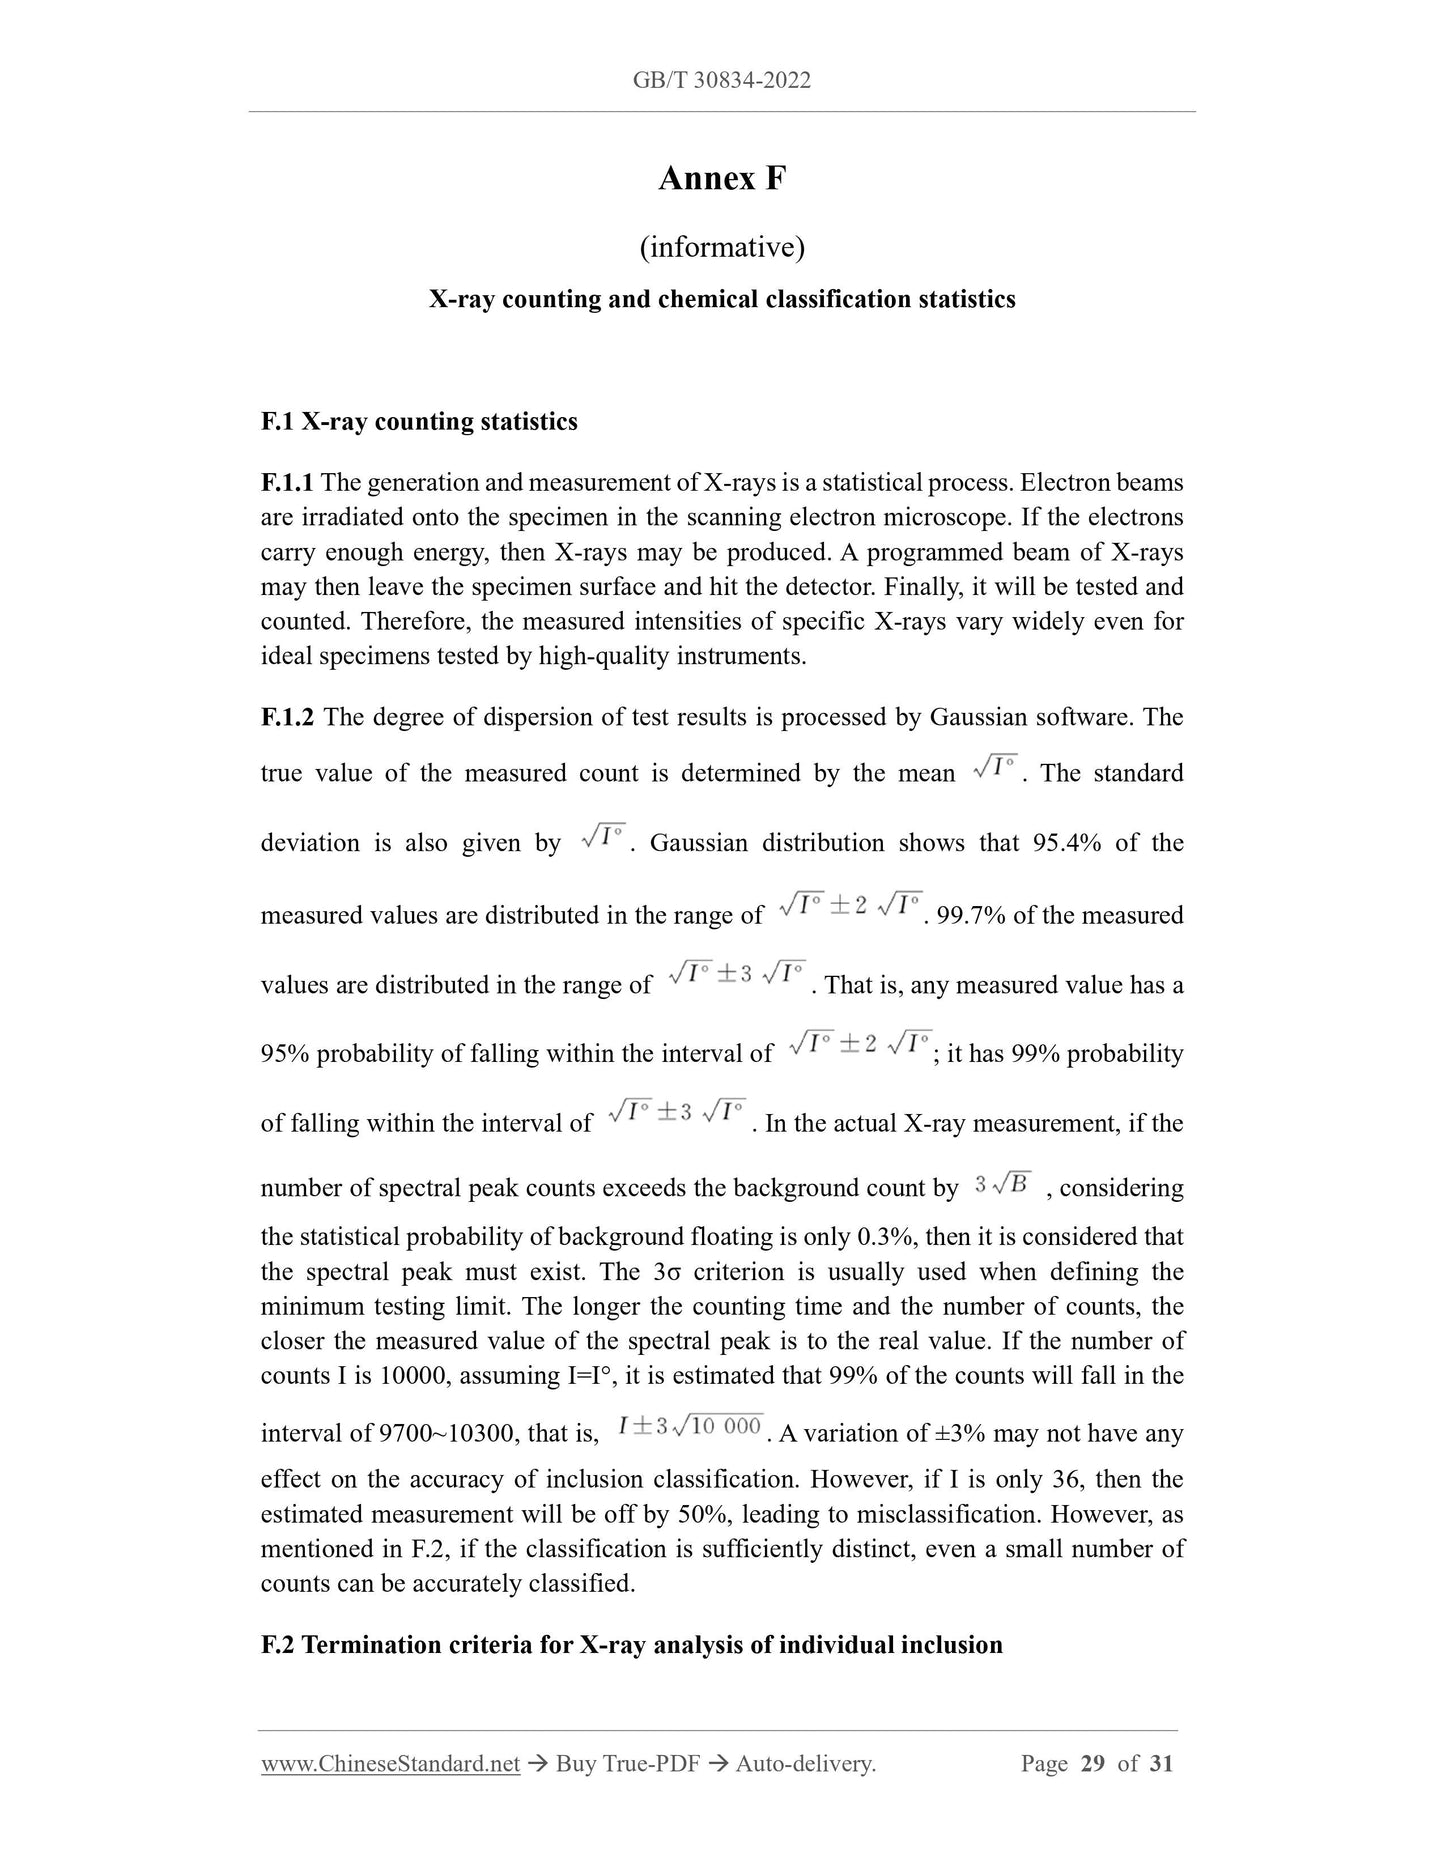 GB/T 30834-2022 Page 11